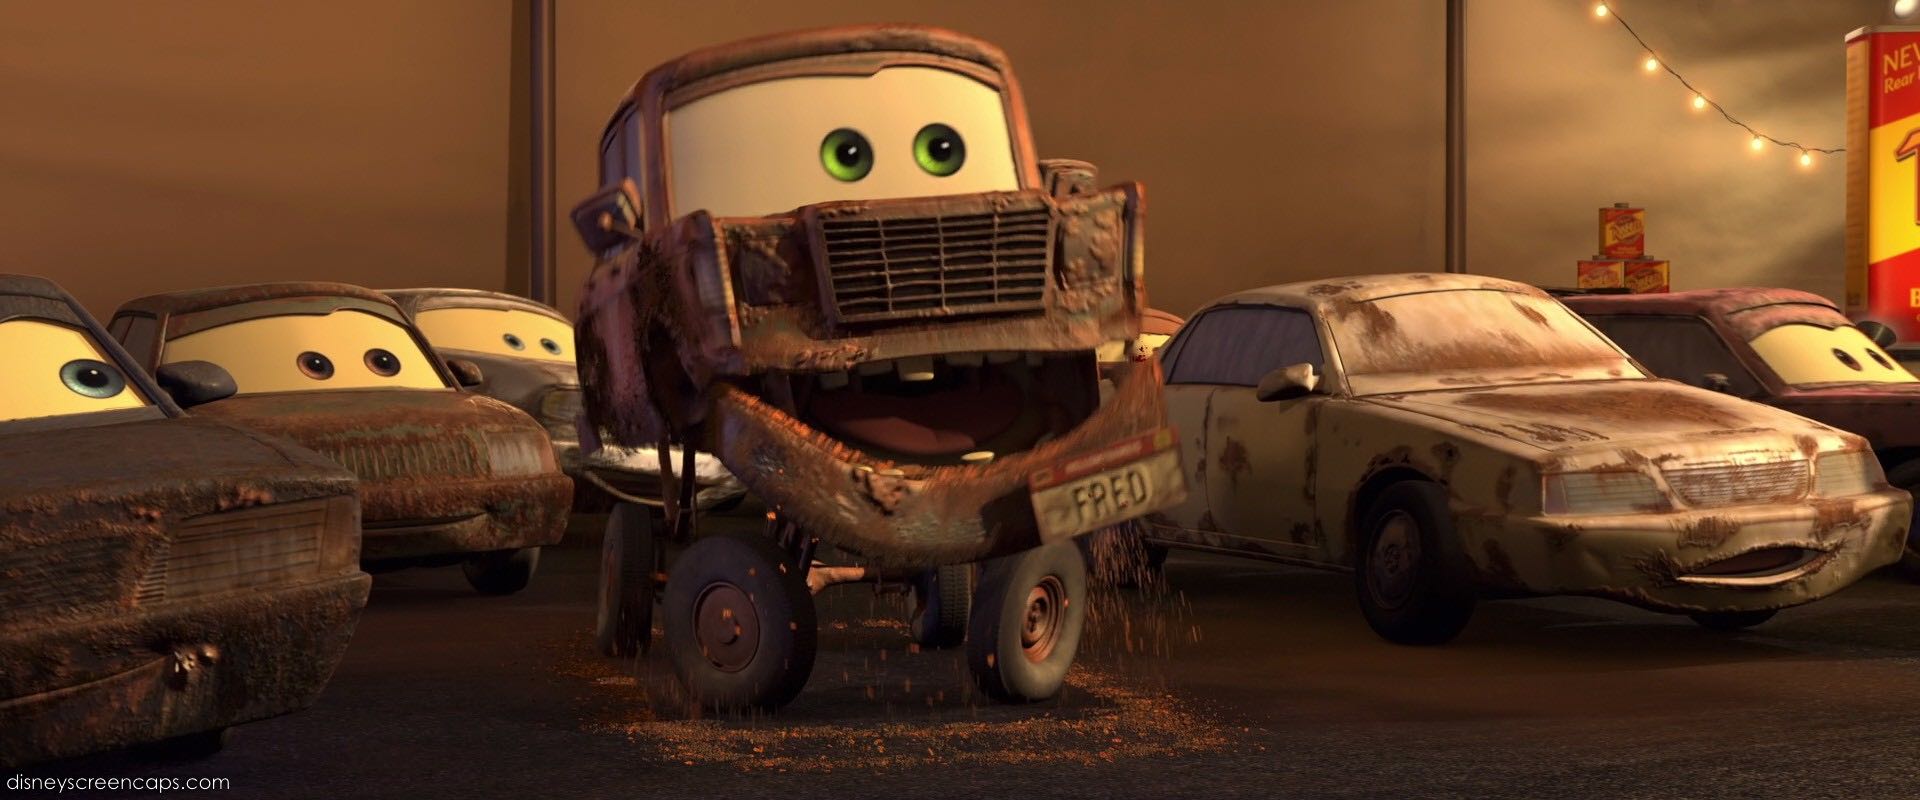 Fred from Disney's Cars